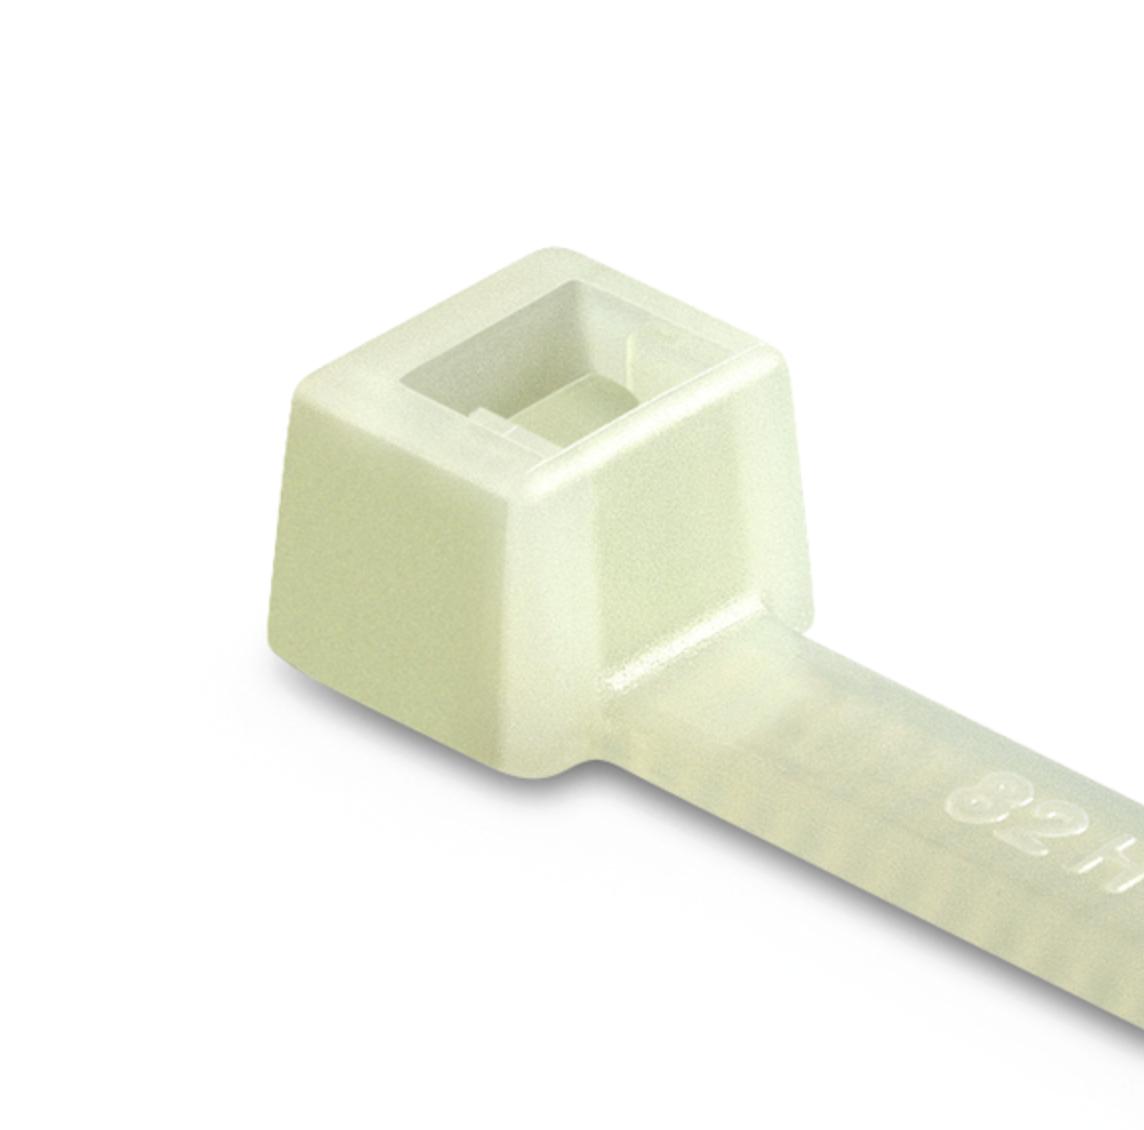 Cable tie natural 2.5x144mm: pack. m / 100pcs.